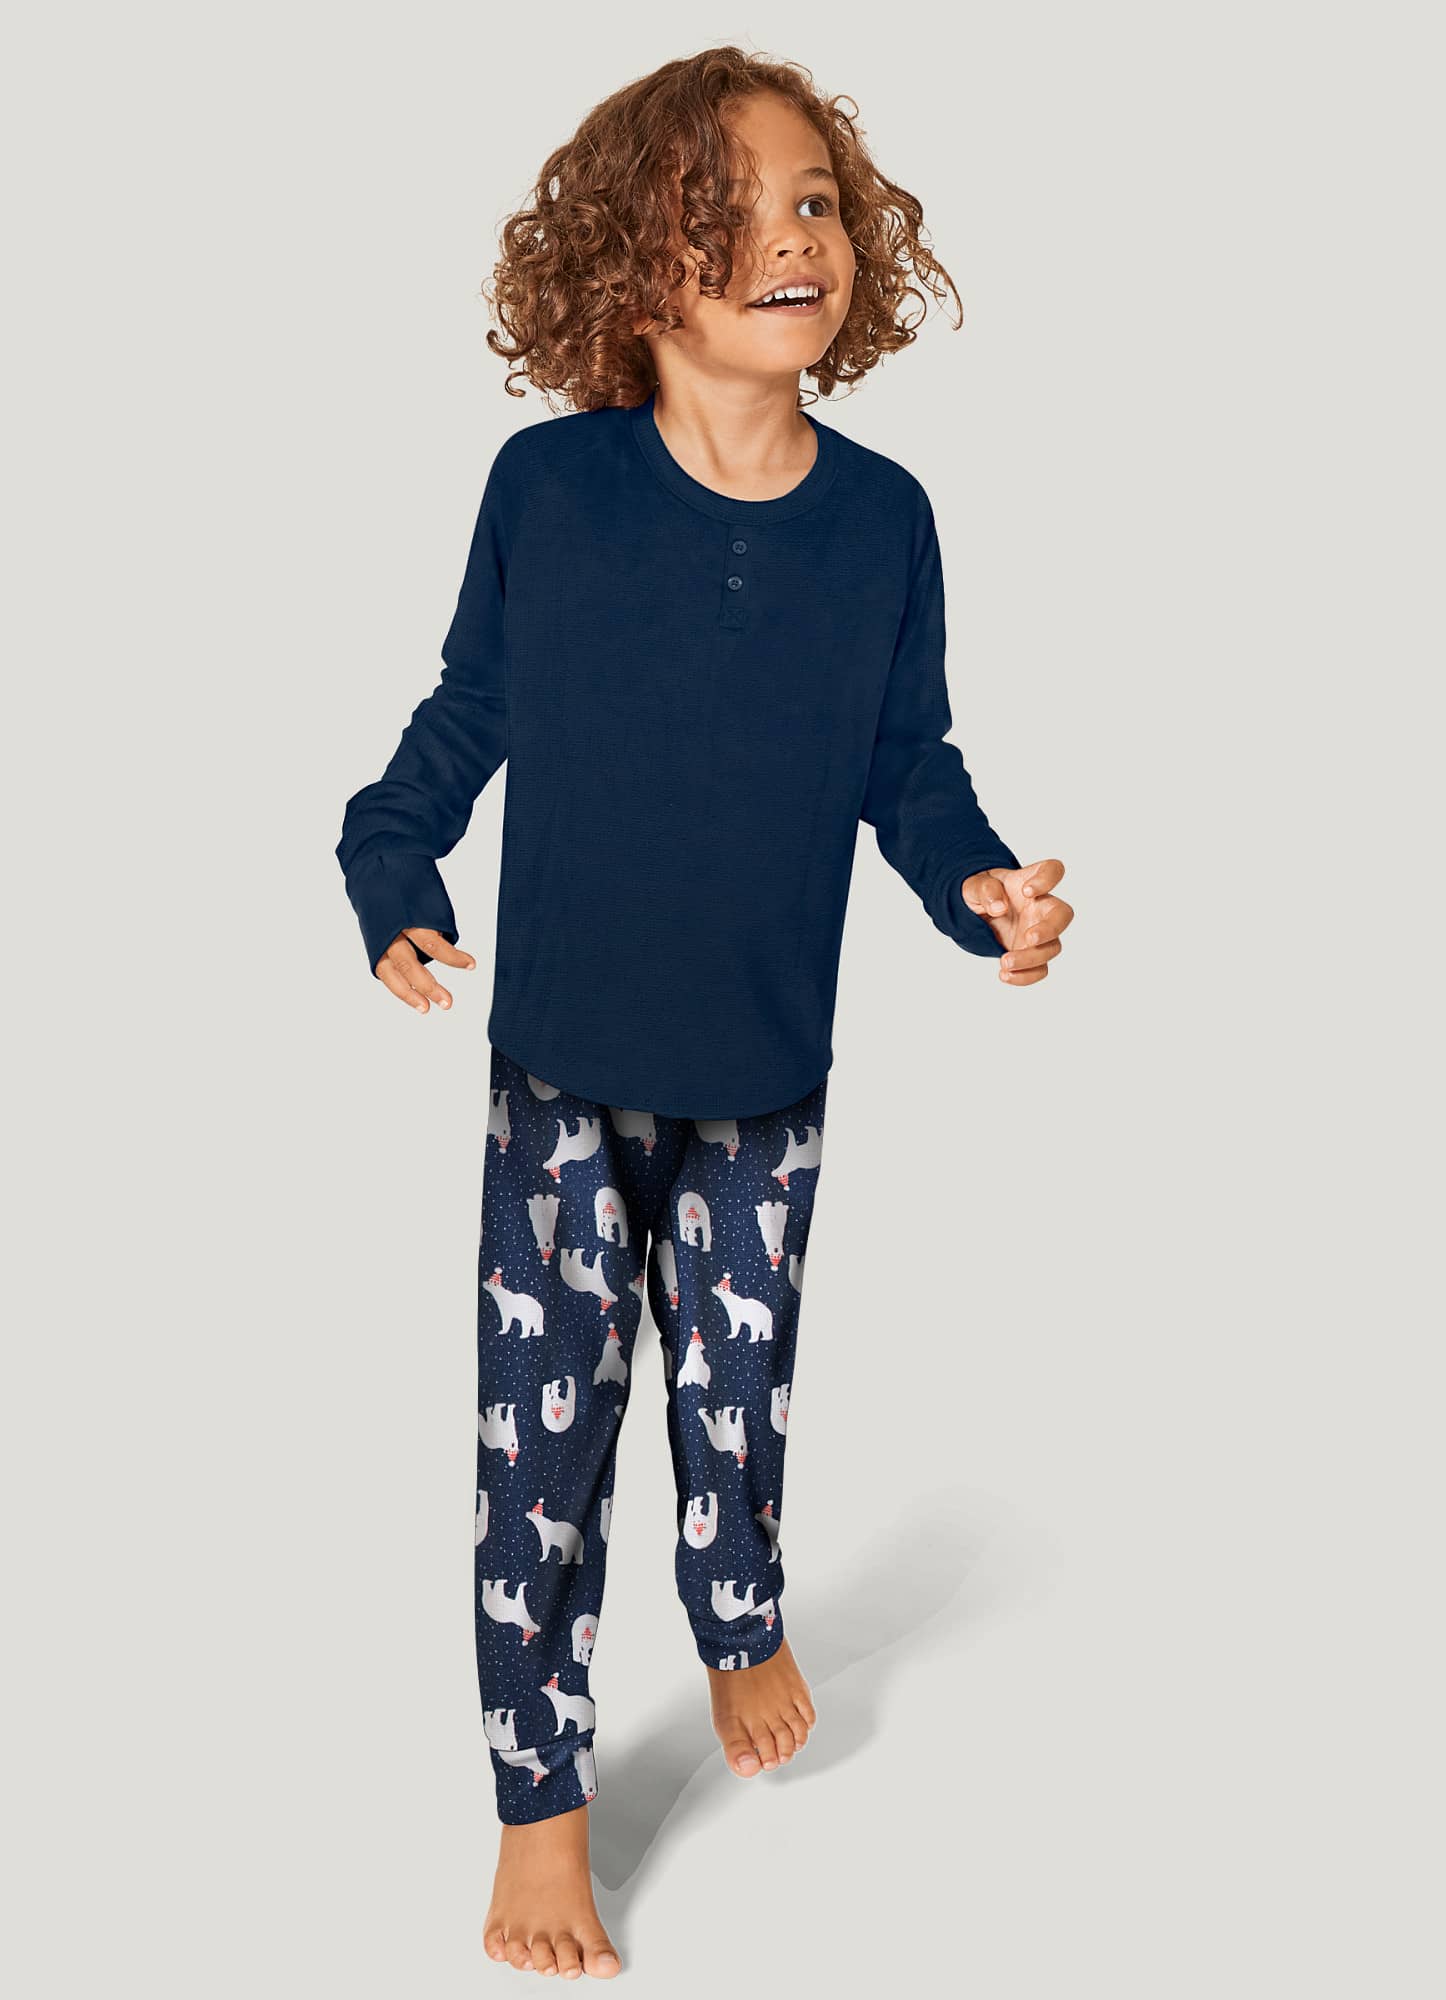 Build-A-Bear Pajama Shop™ Fall Print Pants for Toddlers & Youth